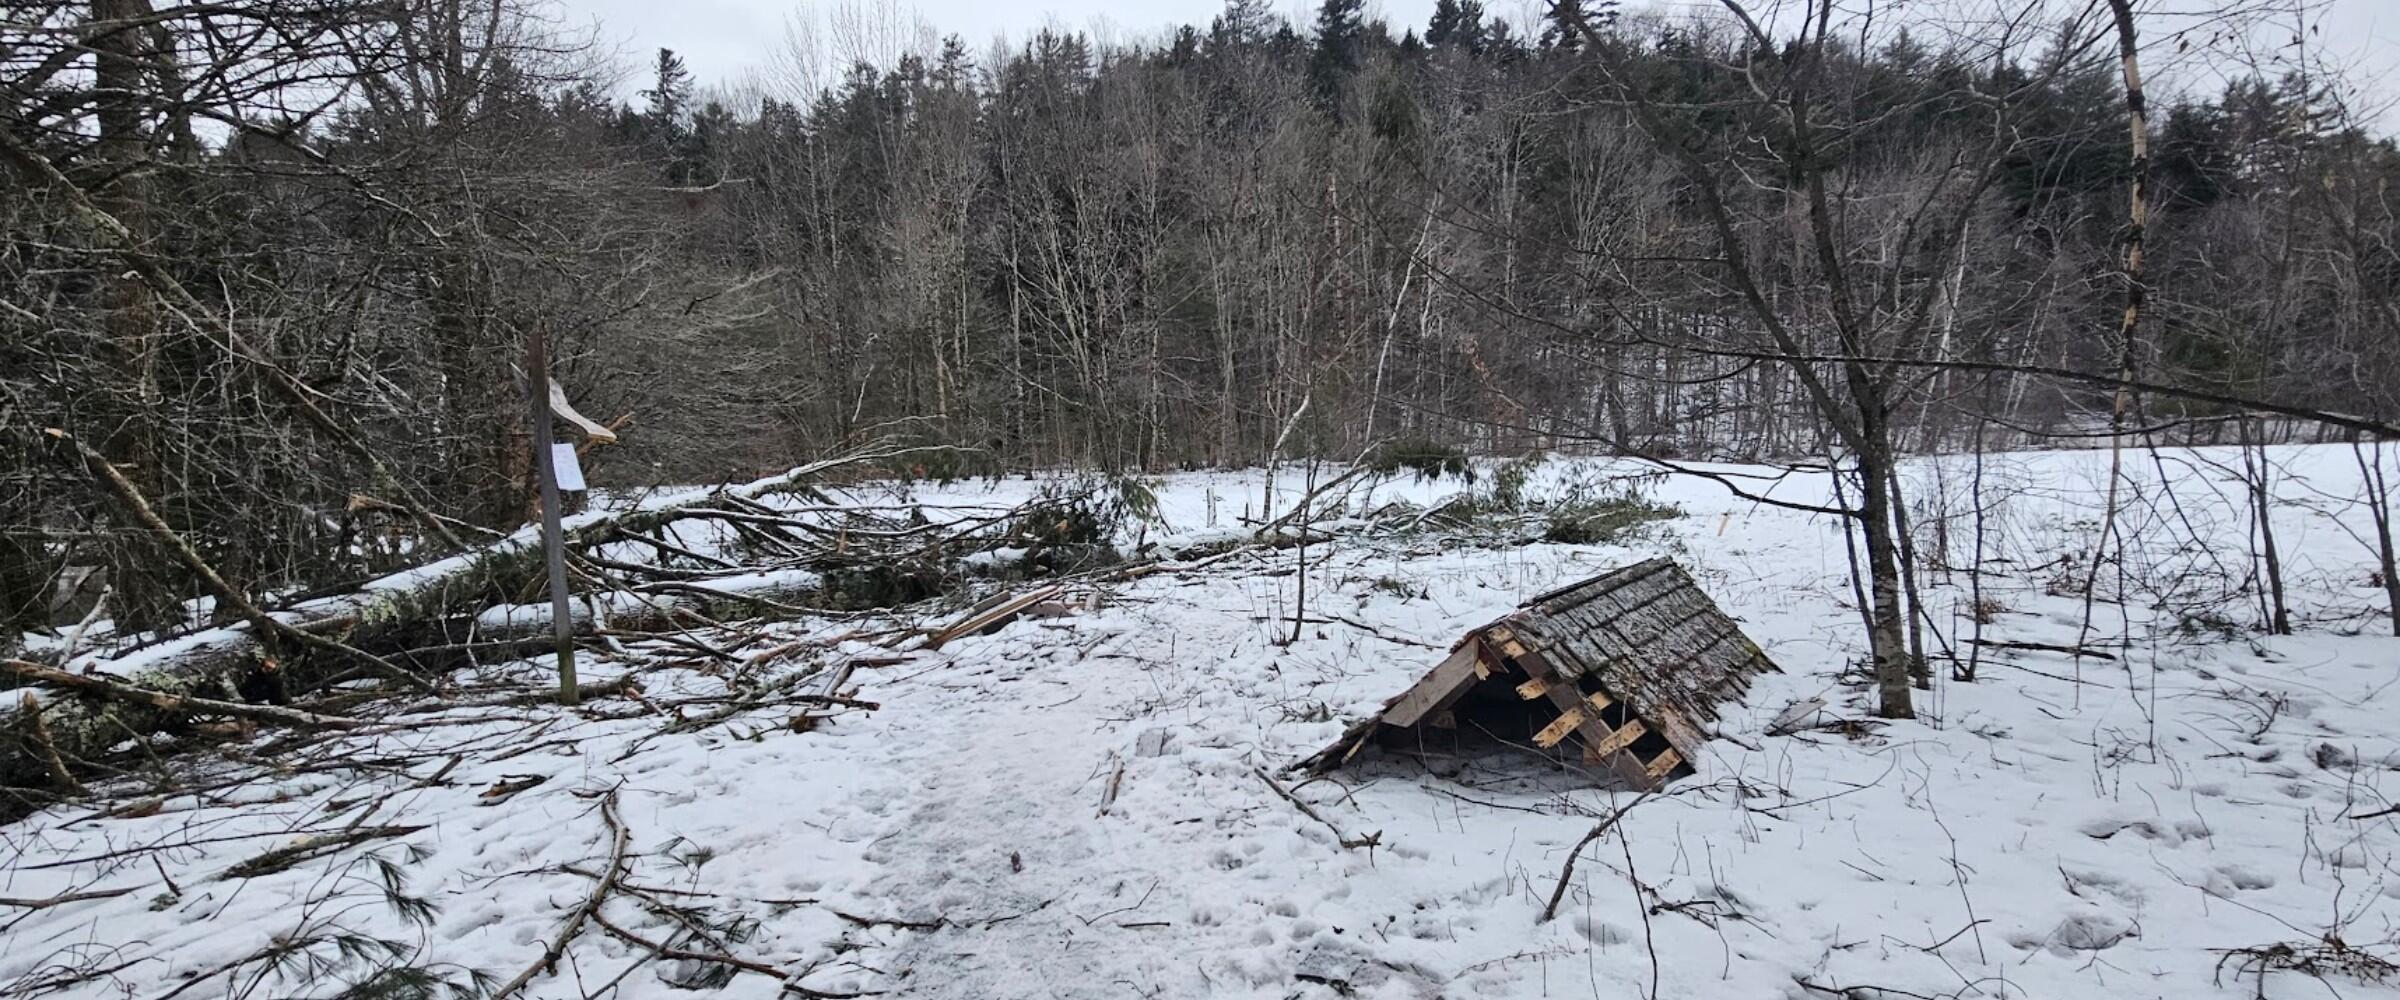 A landscape photo featuring two large downed pine trees and the remnants of a trail kiosk.